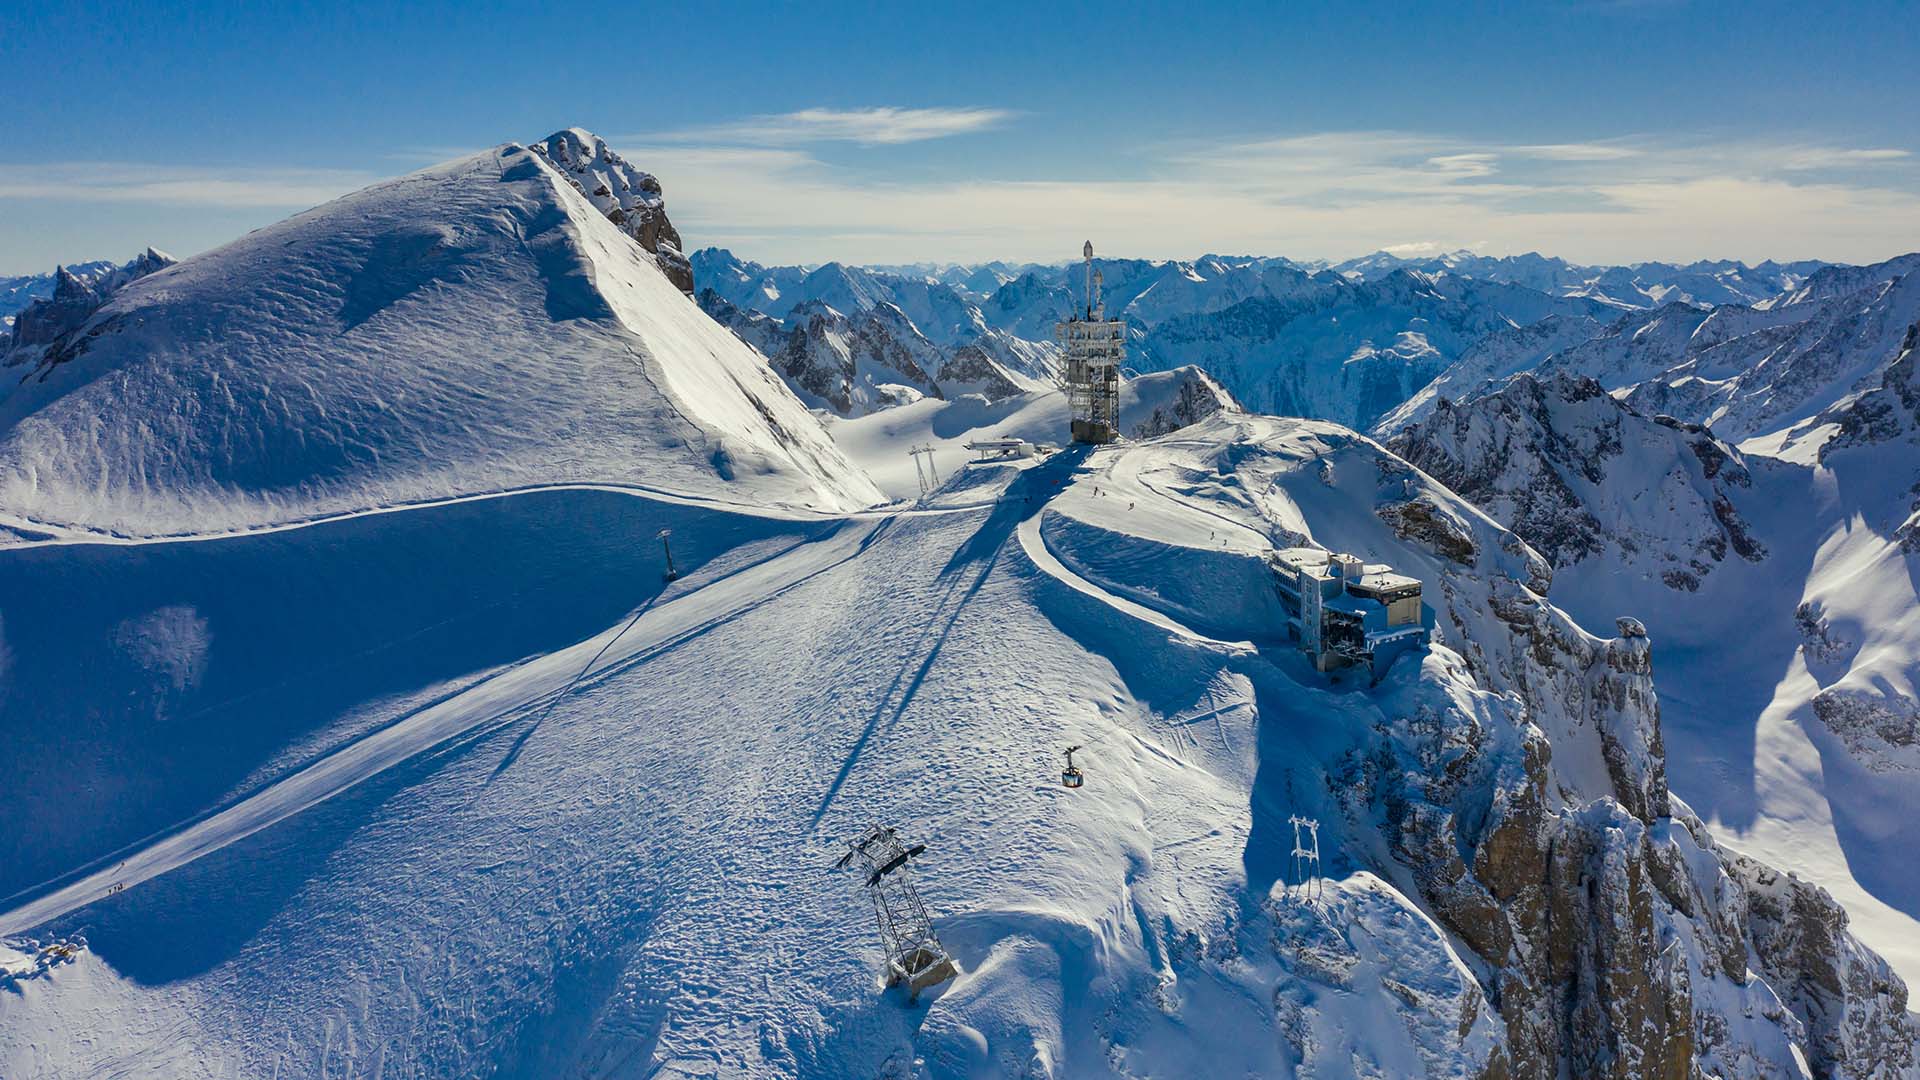 Skiing, snowboarding, tubing & so much more at Mt. Titlis